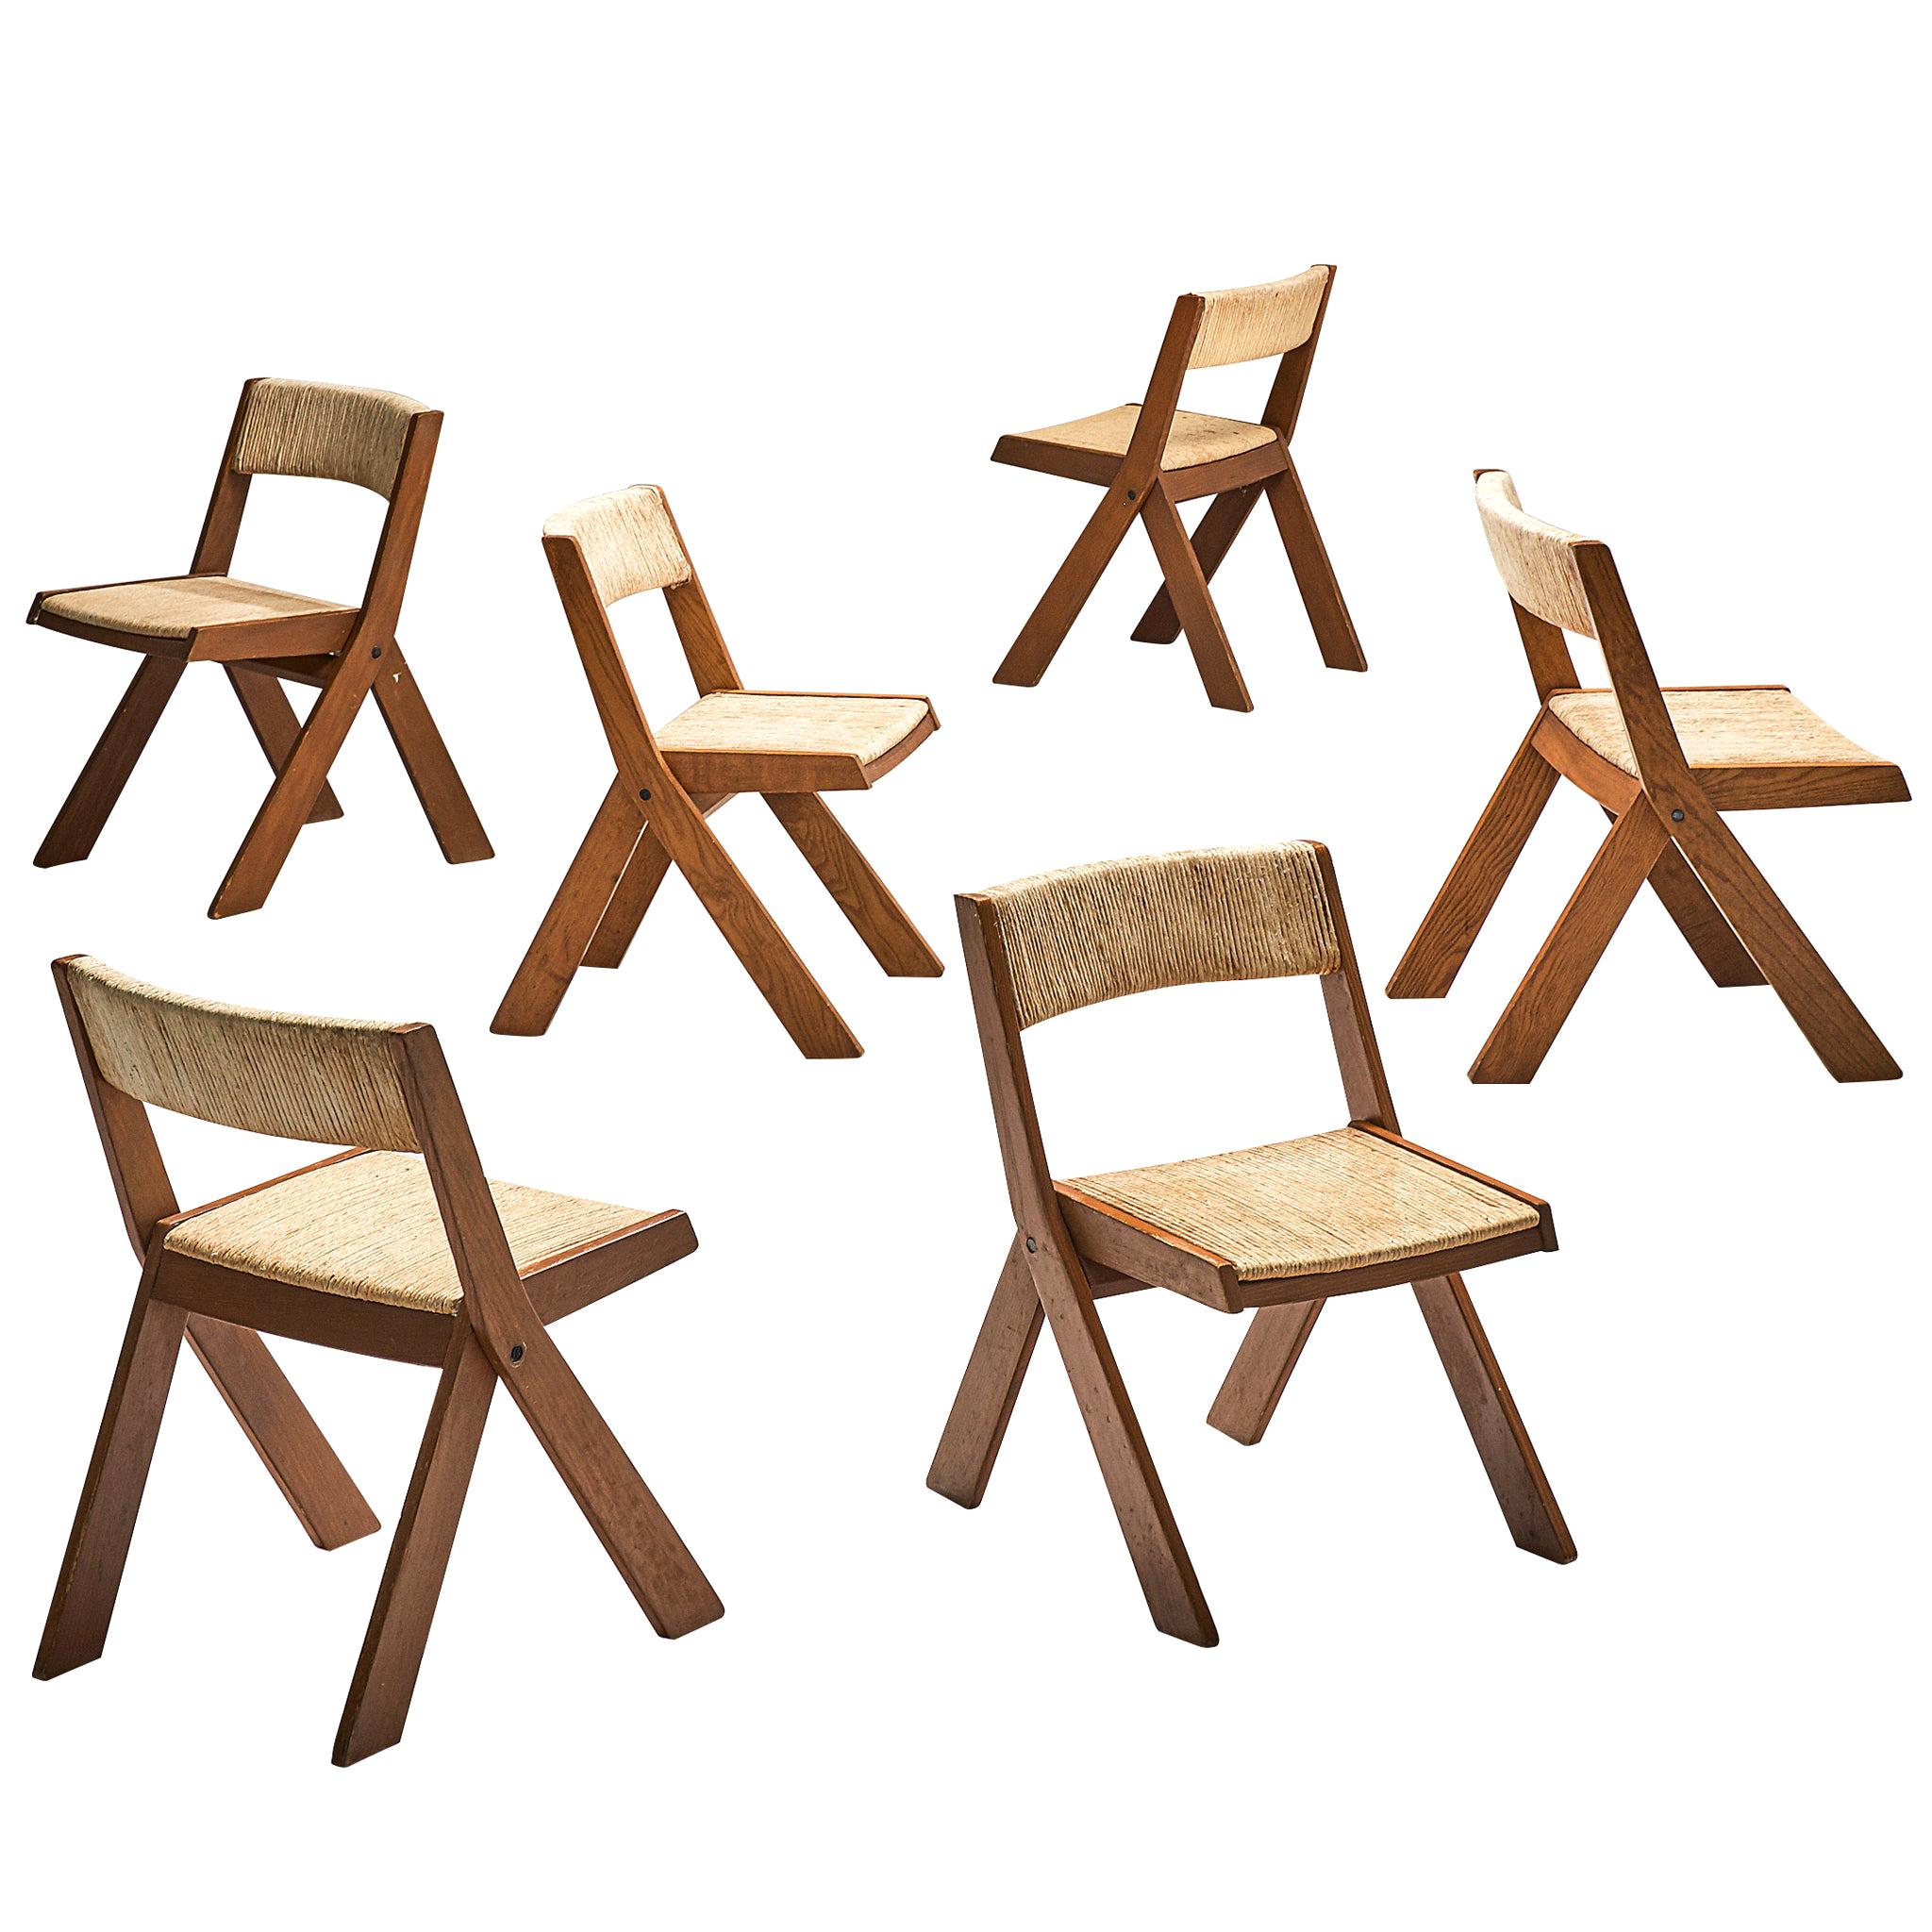 Italian Set of Six Chairs with Rope Seats